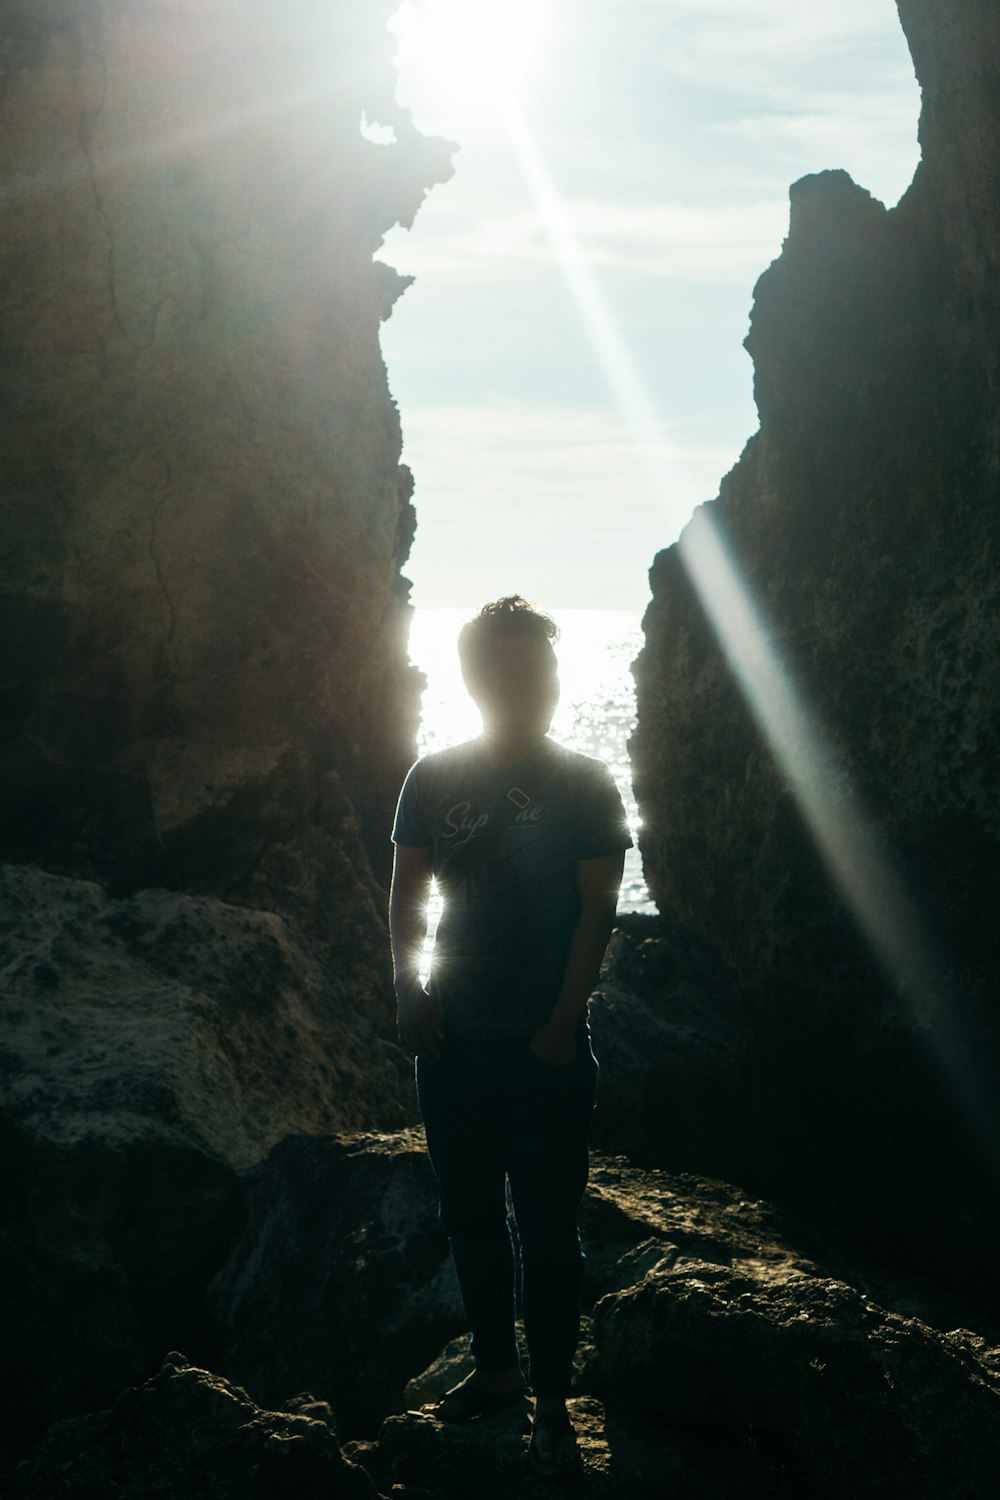 a person standing in a cave looking out at the ocean